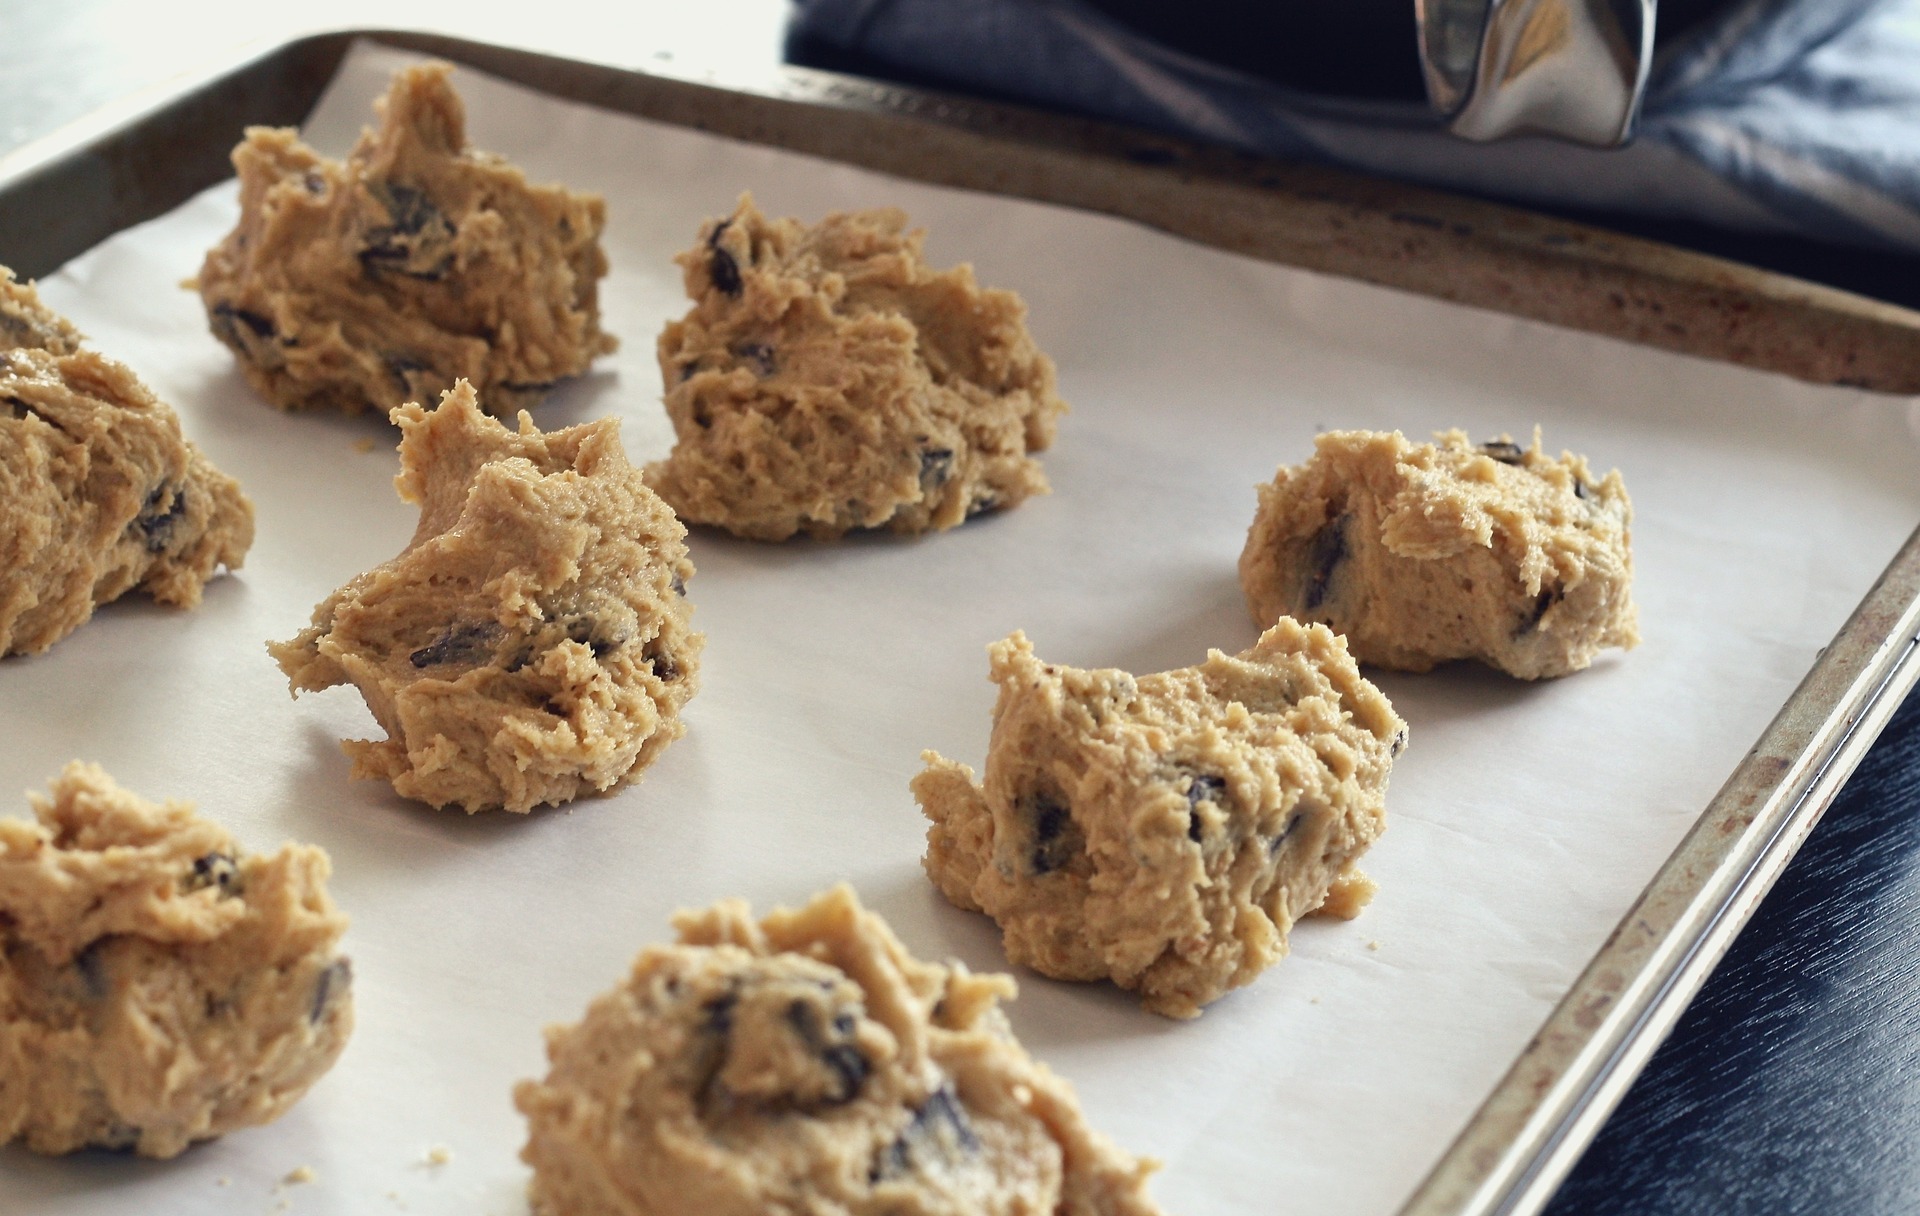 Cookie dough, is it good for you?